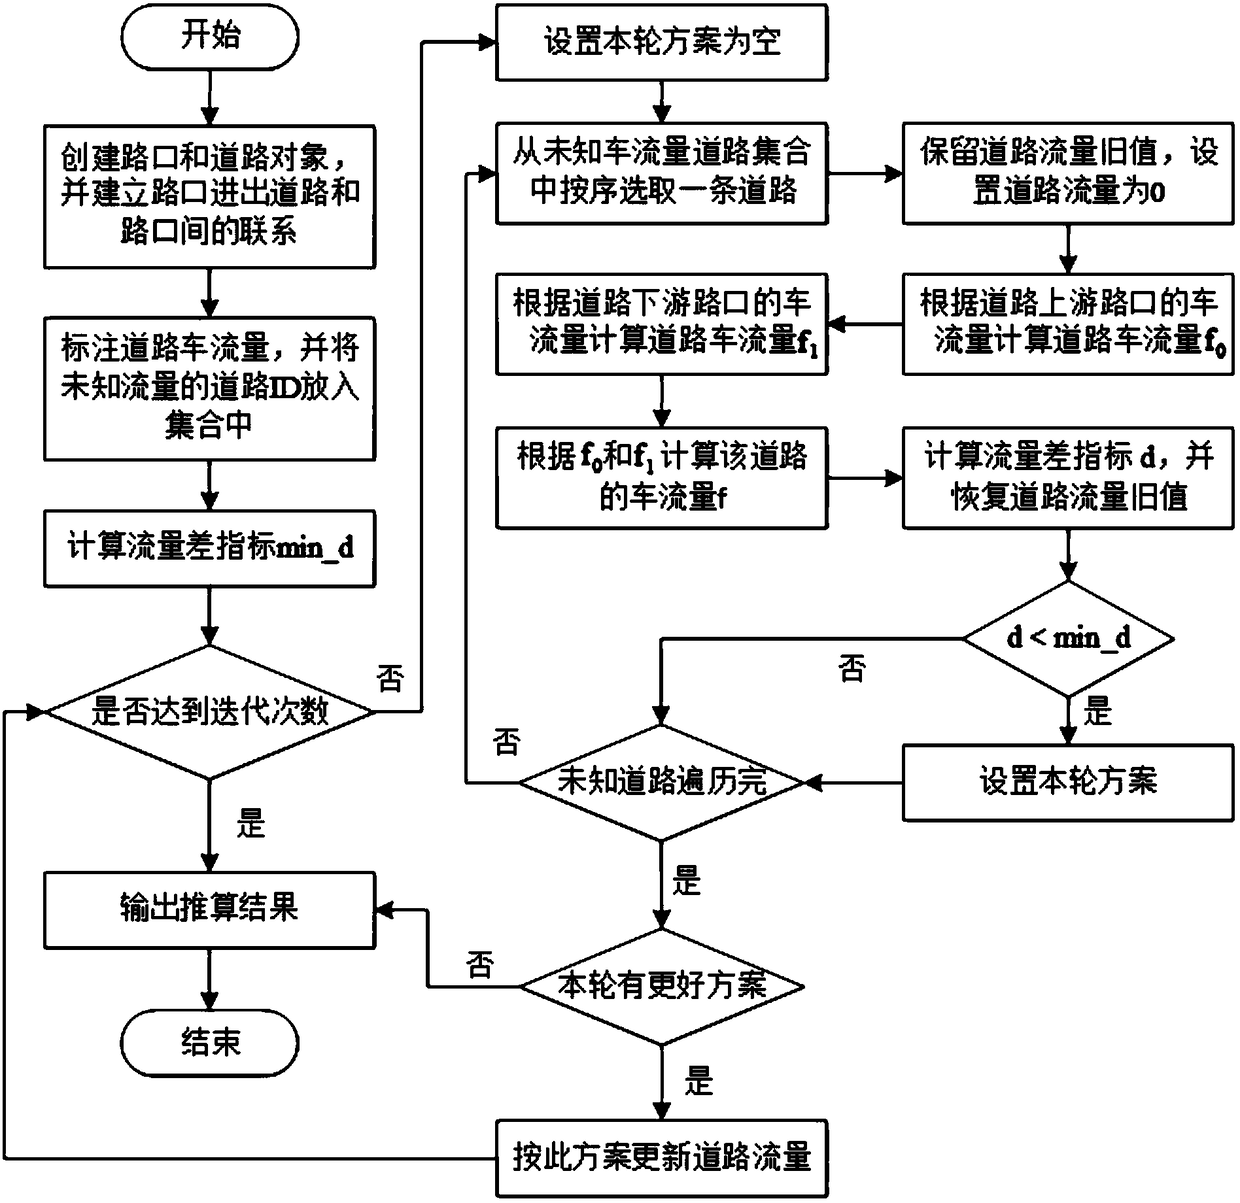 Upstream and downstream intersection traffic flow based heuristic lost road traffic flow estimation method